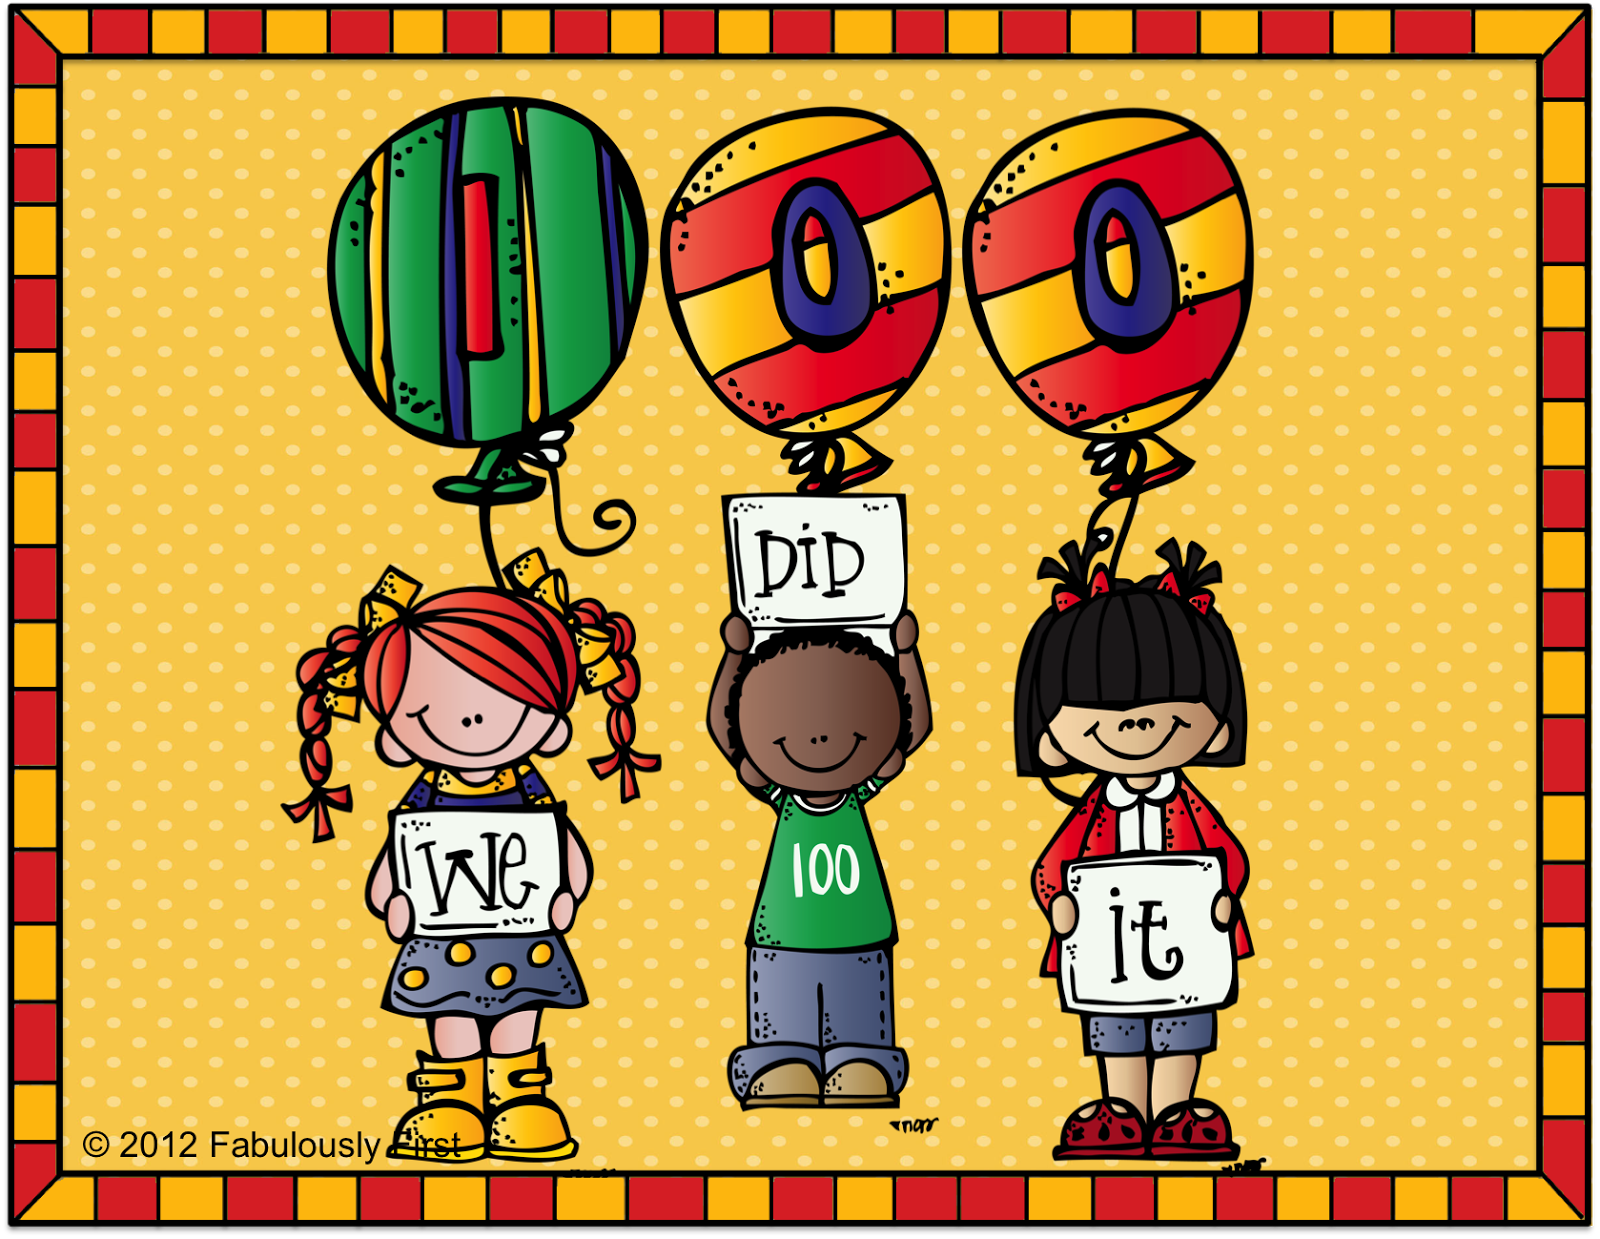 Clip Arts Related To : happy 100th day of school clip art. 